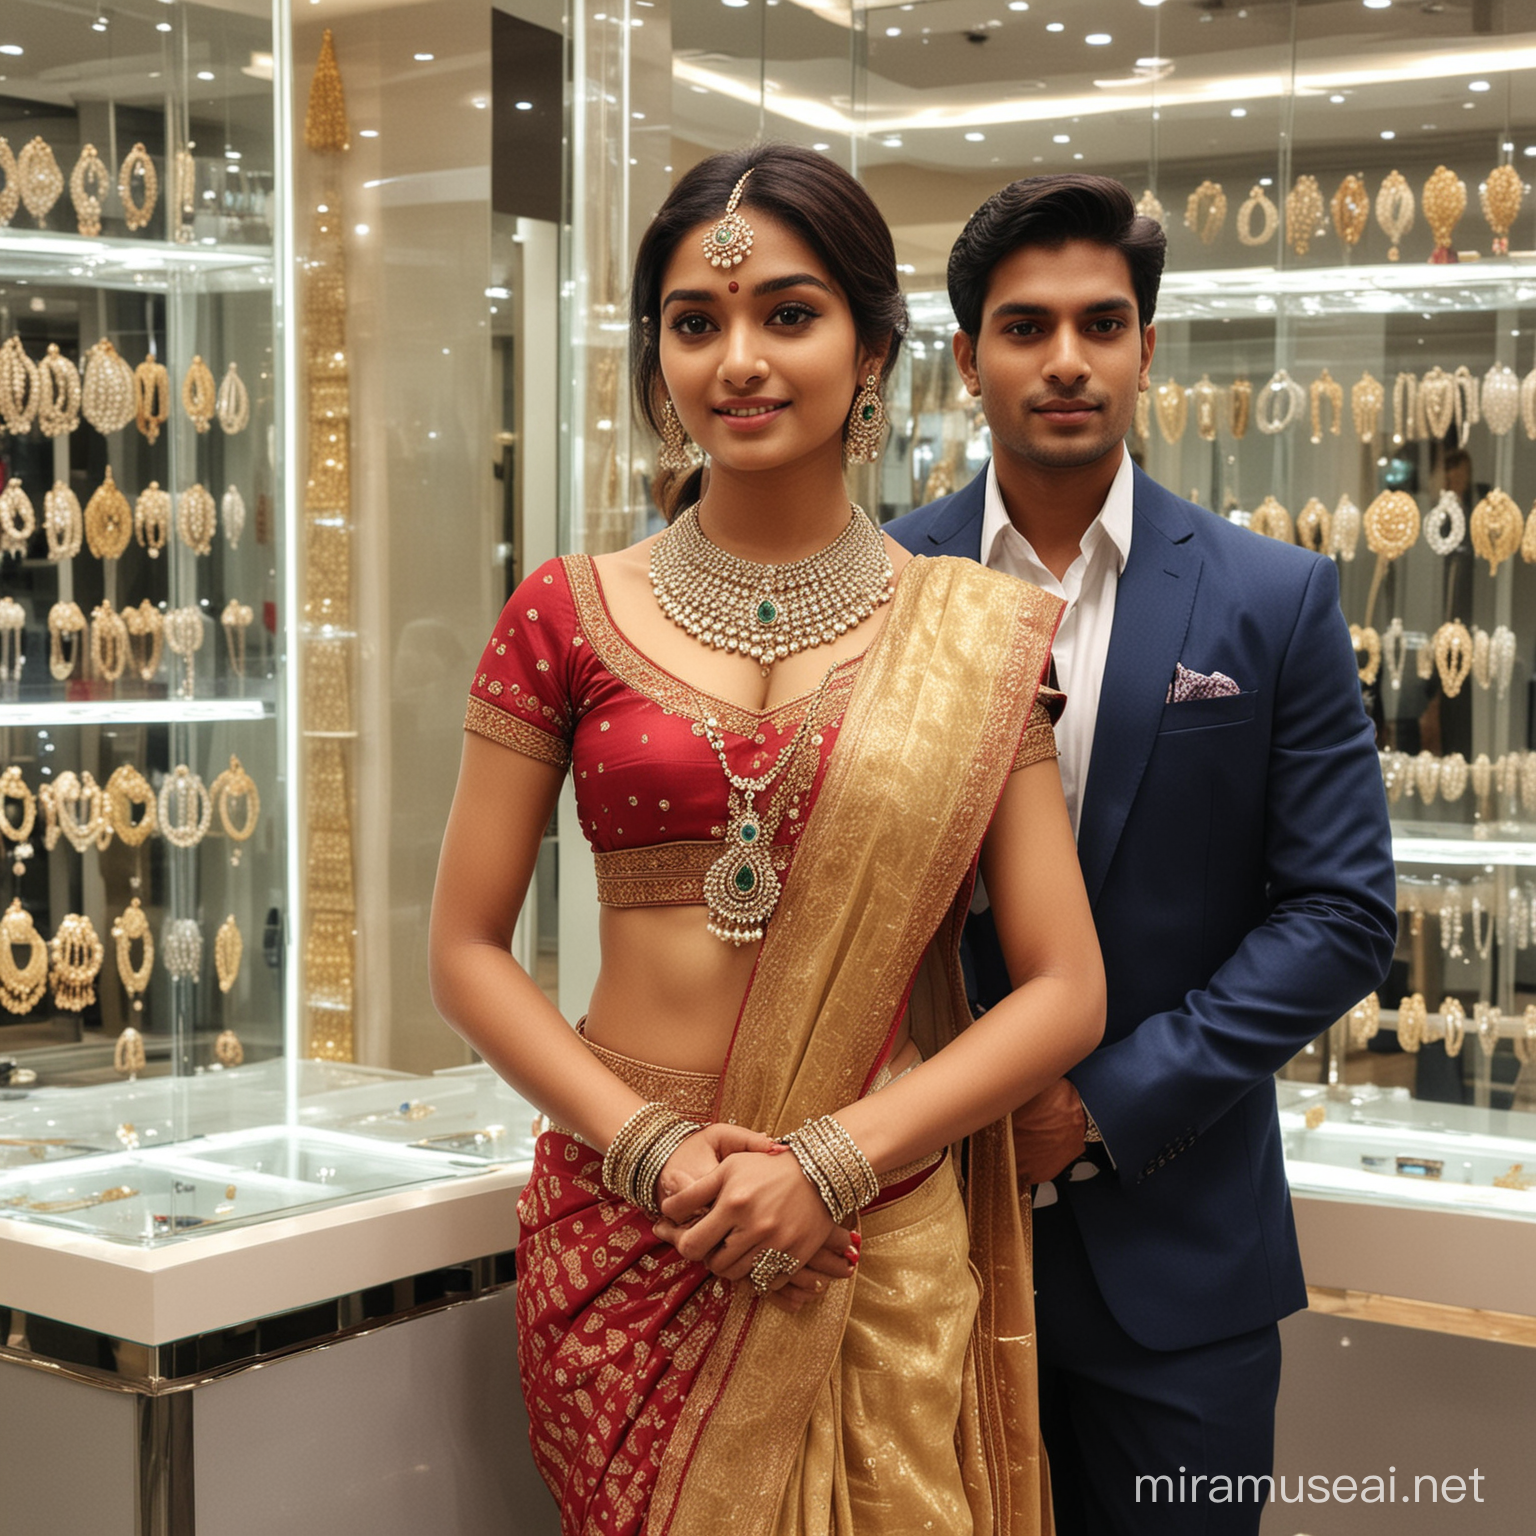 Young Indian beautiful lady and handsome man standing in a jewellery show room grand